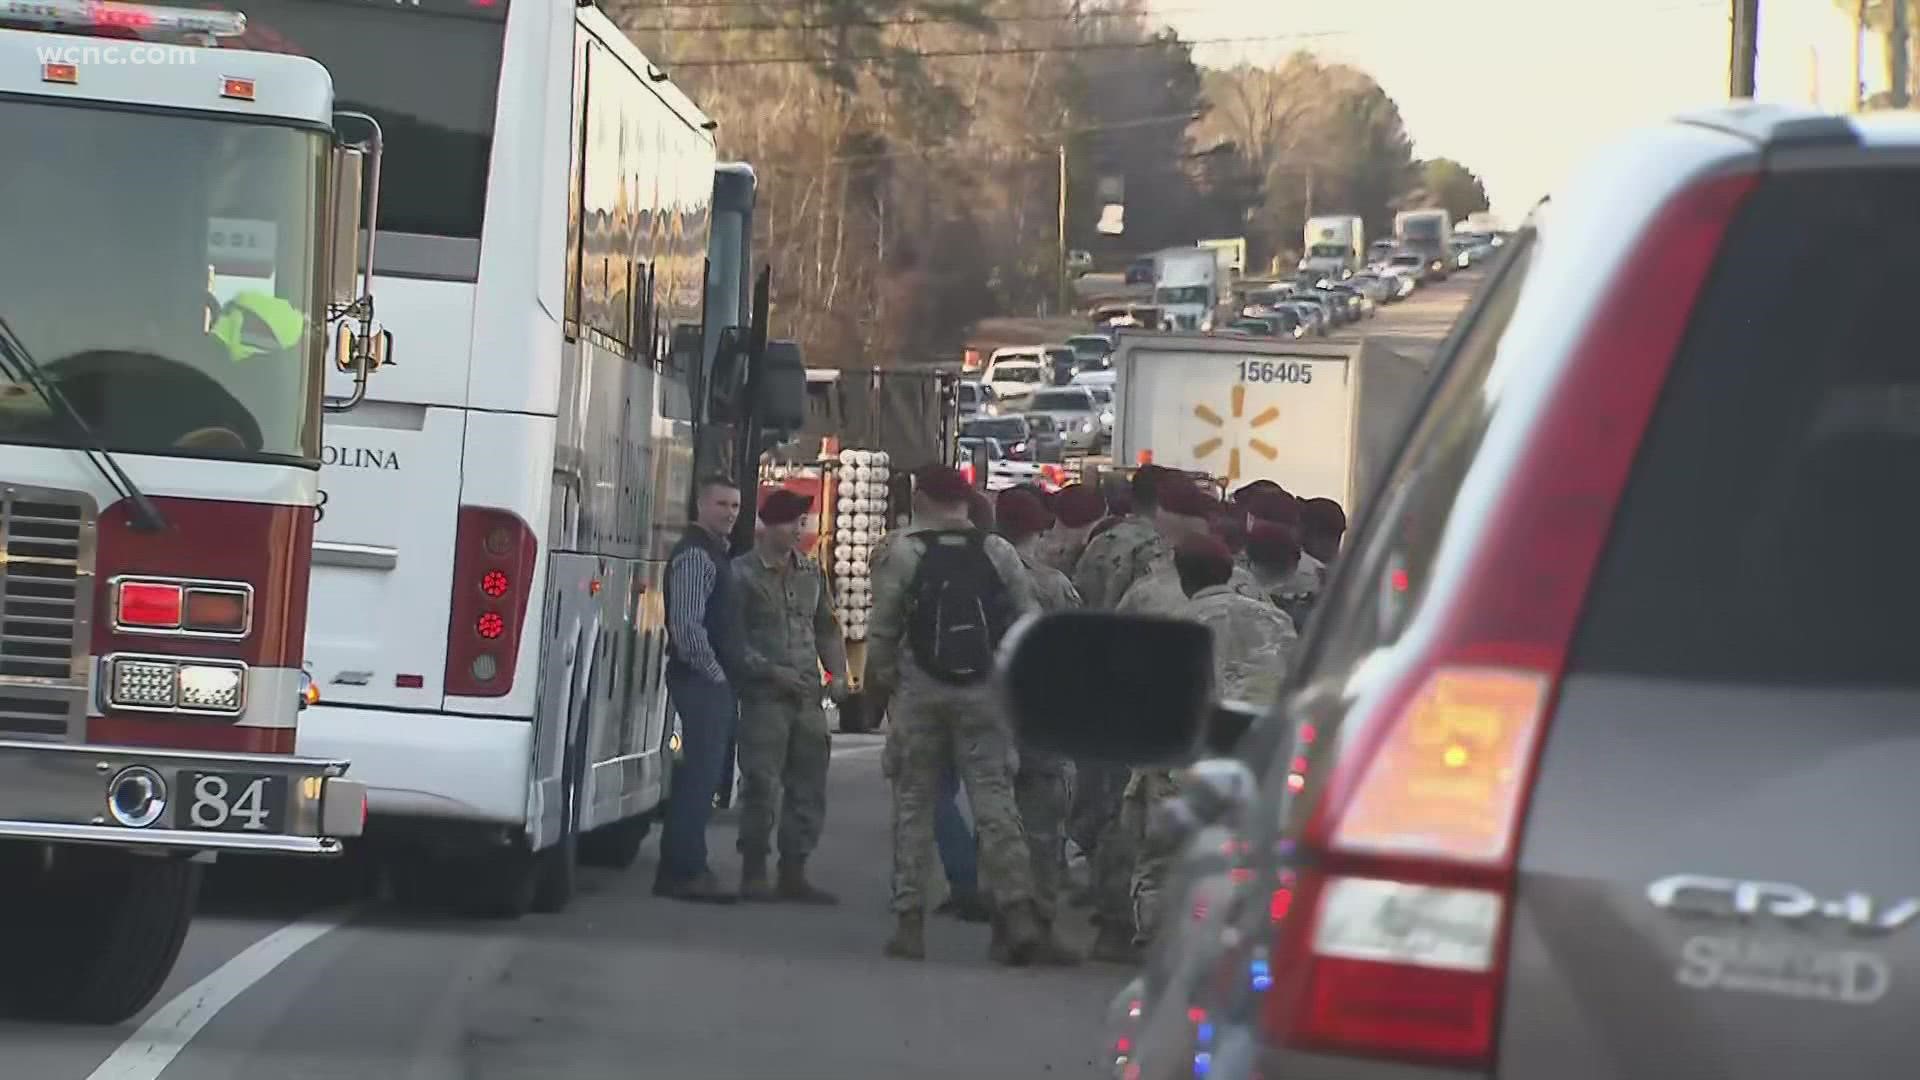 The soldiers were on the way to Charlotte for a Charlotte Hornets game.